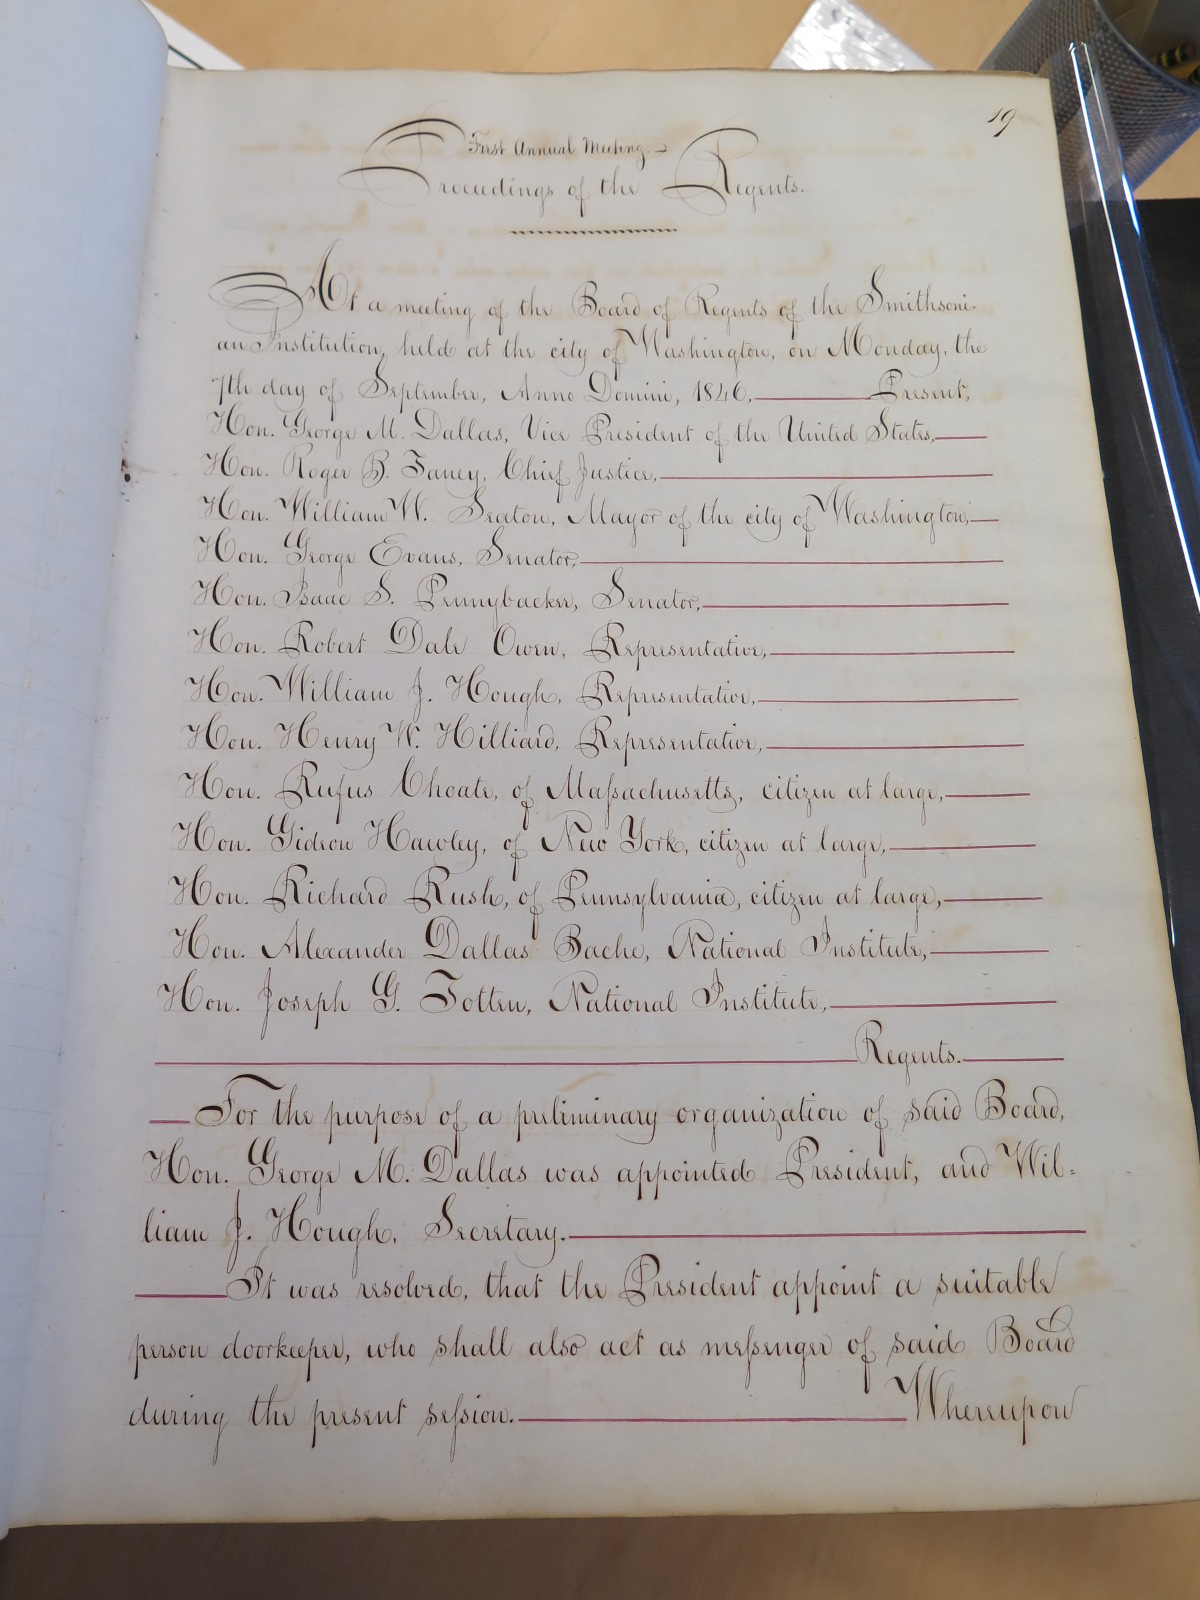 Board of Regents minutes - First Annual Meeting, by Lisa Fthenakis, 2014, Record Unit 1 - Smithsonian Institution Board of Regents, Minutes, 1846- , Smithsonian Institution Archives.